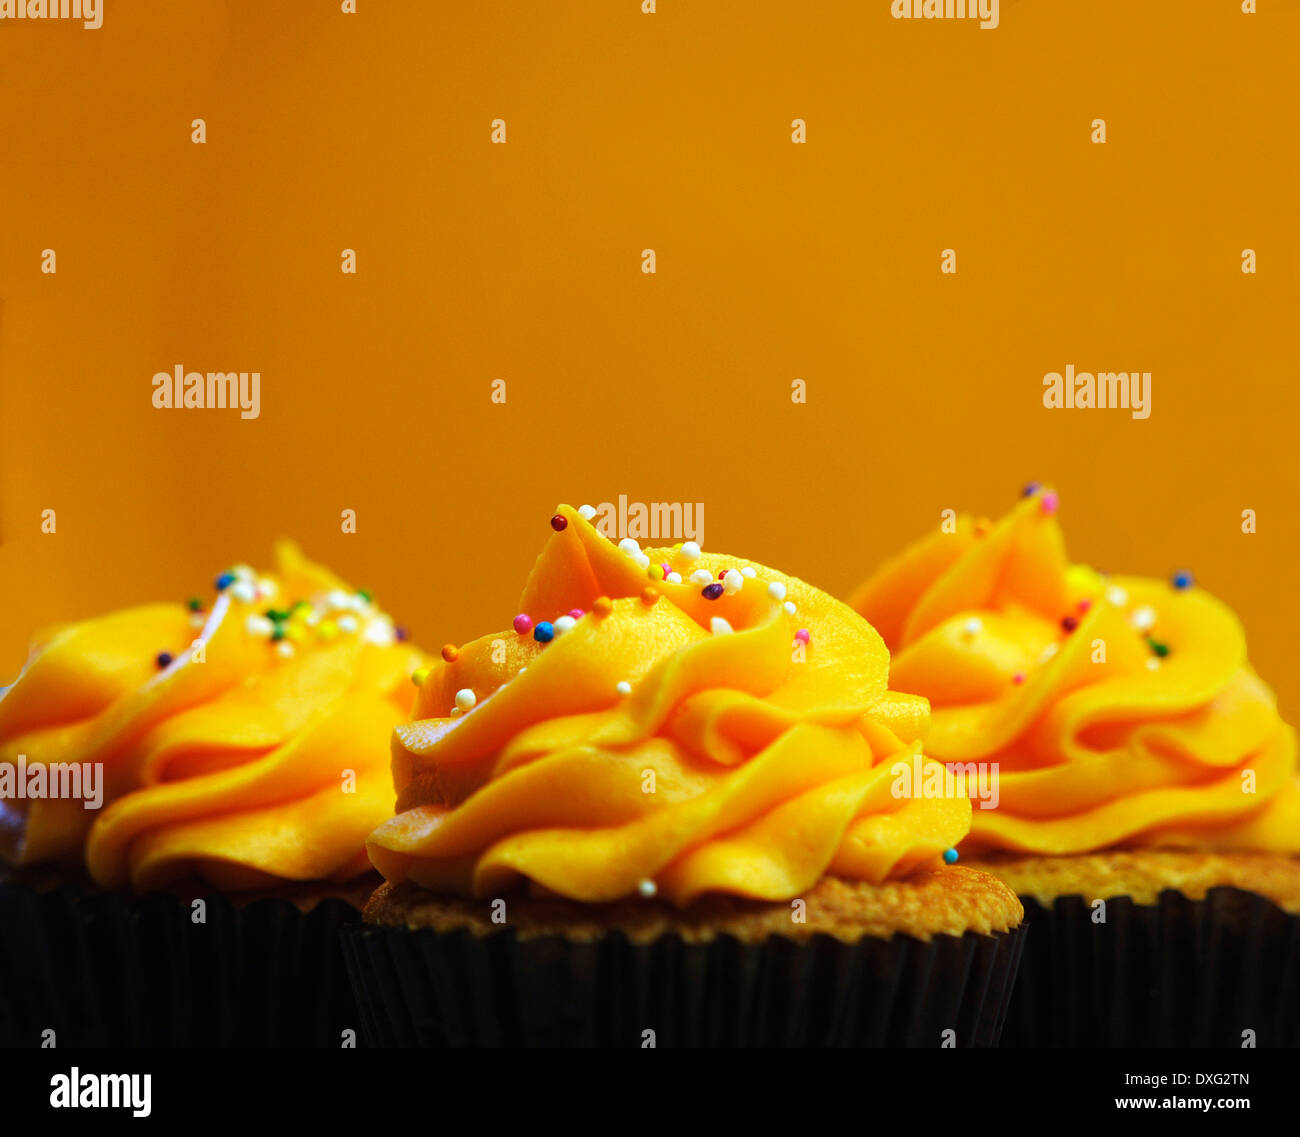 Trio Of Orange Iced Cupcakes In A Row Stock Photo